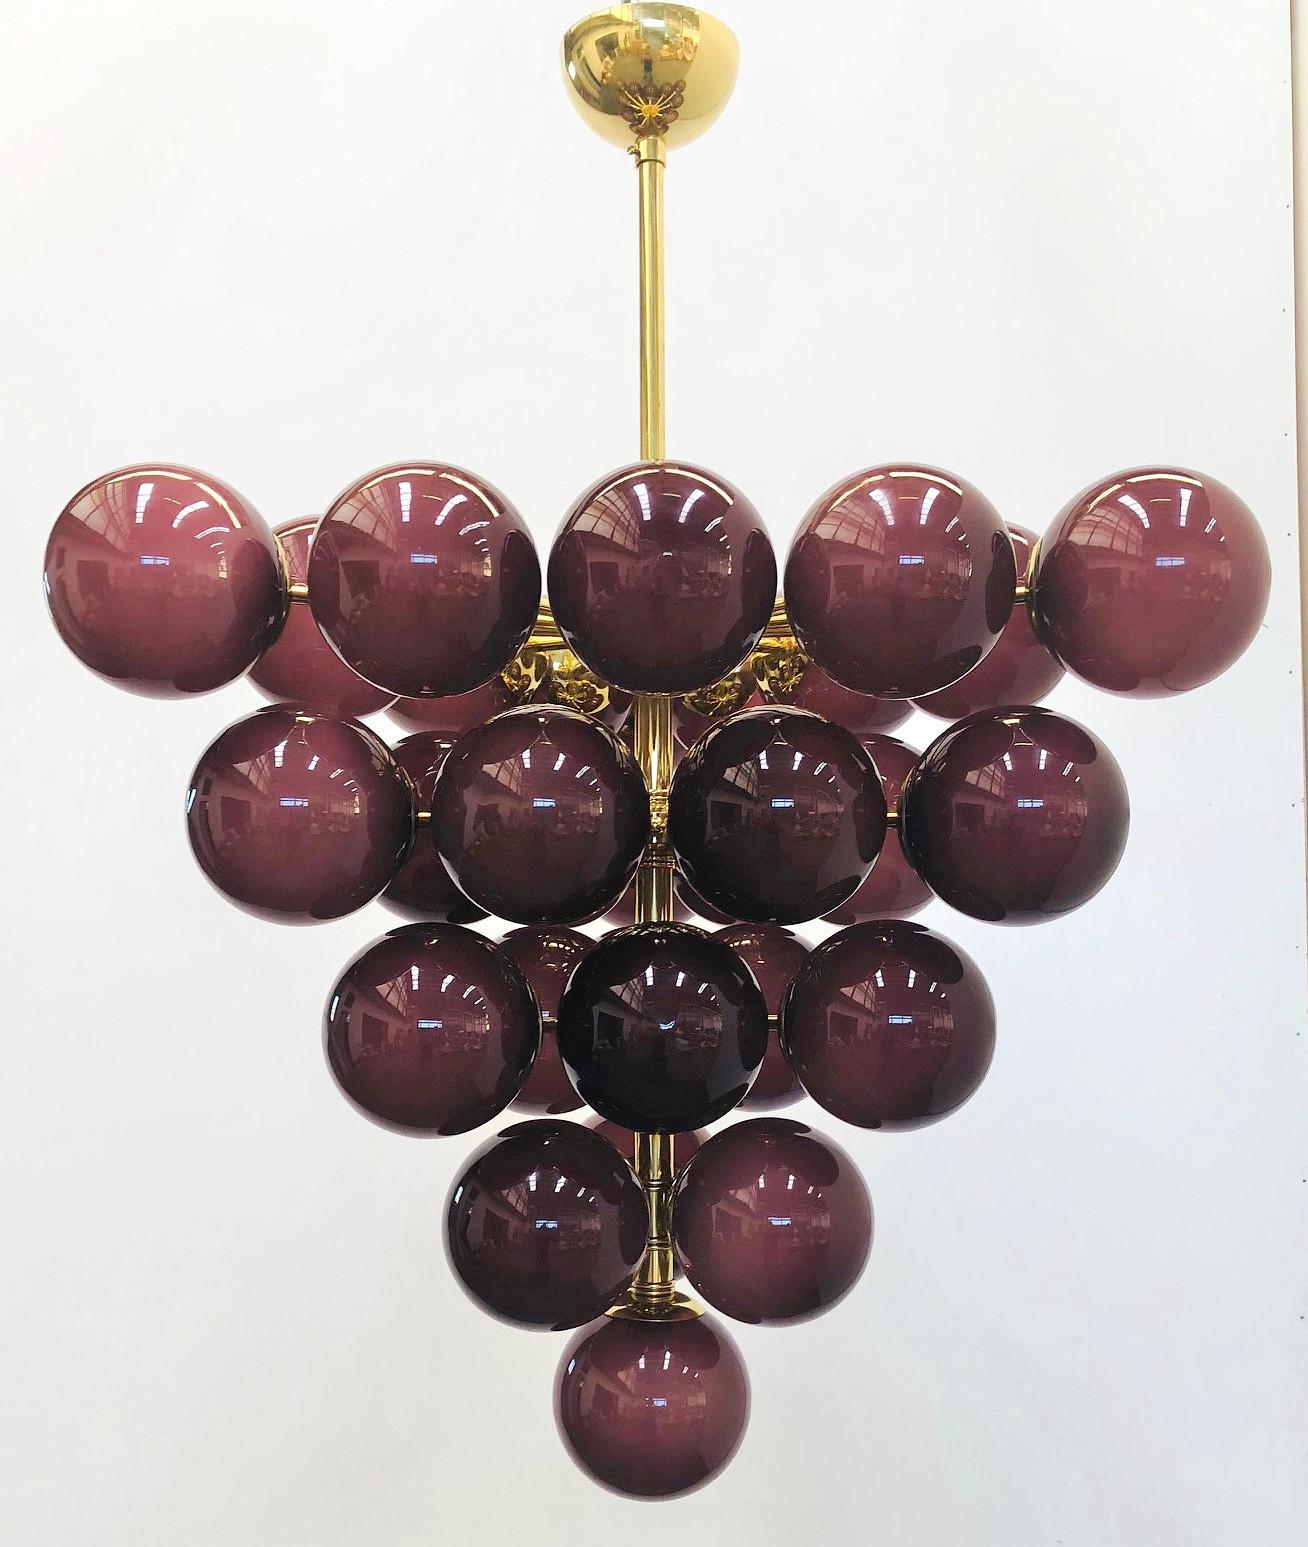 Italian chandelier with frosted amethyst Murano glass globes  mounted on polished brass frame / Designed by Fabio Bergomi for Fabio Ltd / Made in Italy
31 lights / E12 or E14 type / max 40W each
Diameter: 31.5 inches / Height: 31.5 inches not